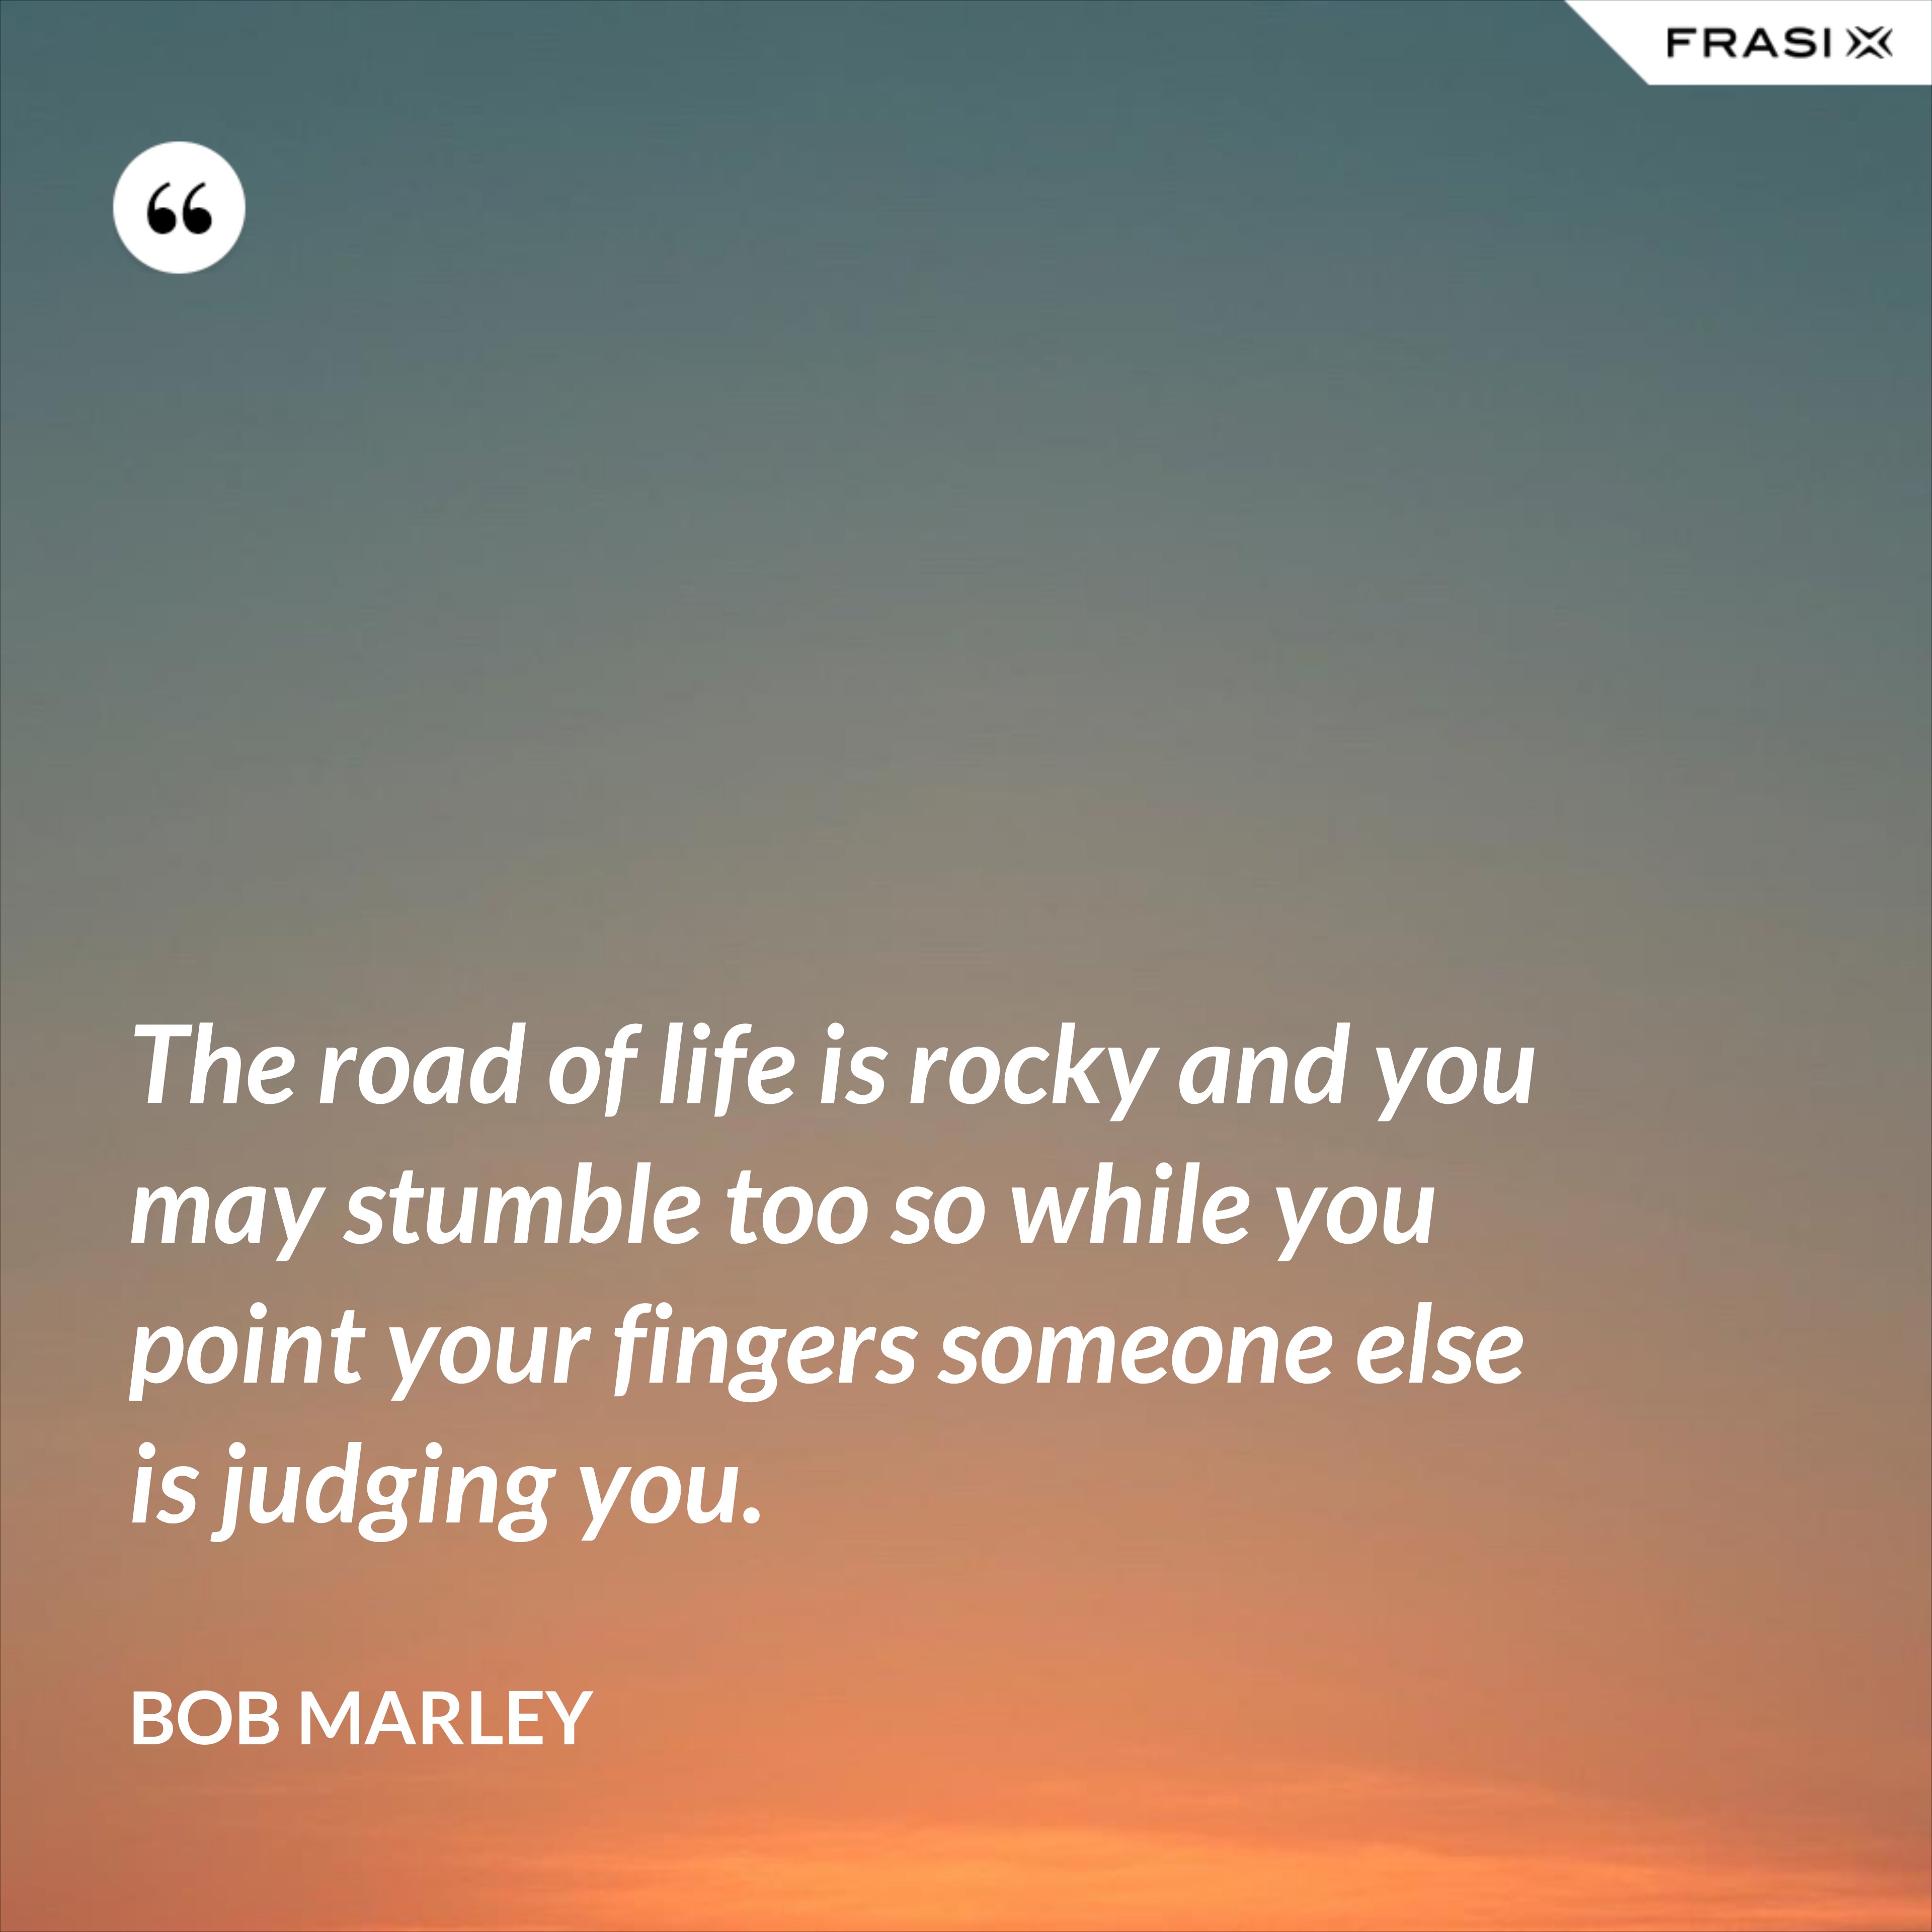 The road of life is rocky and you may stumble too so while you point your fingers someone else is judging you. - Bob Marley